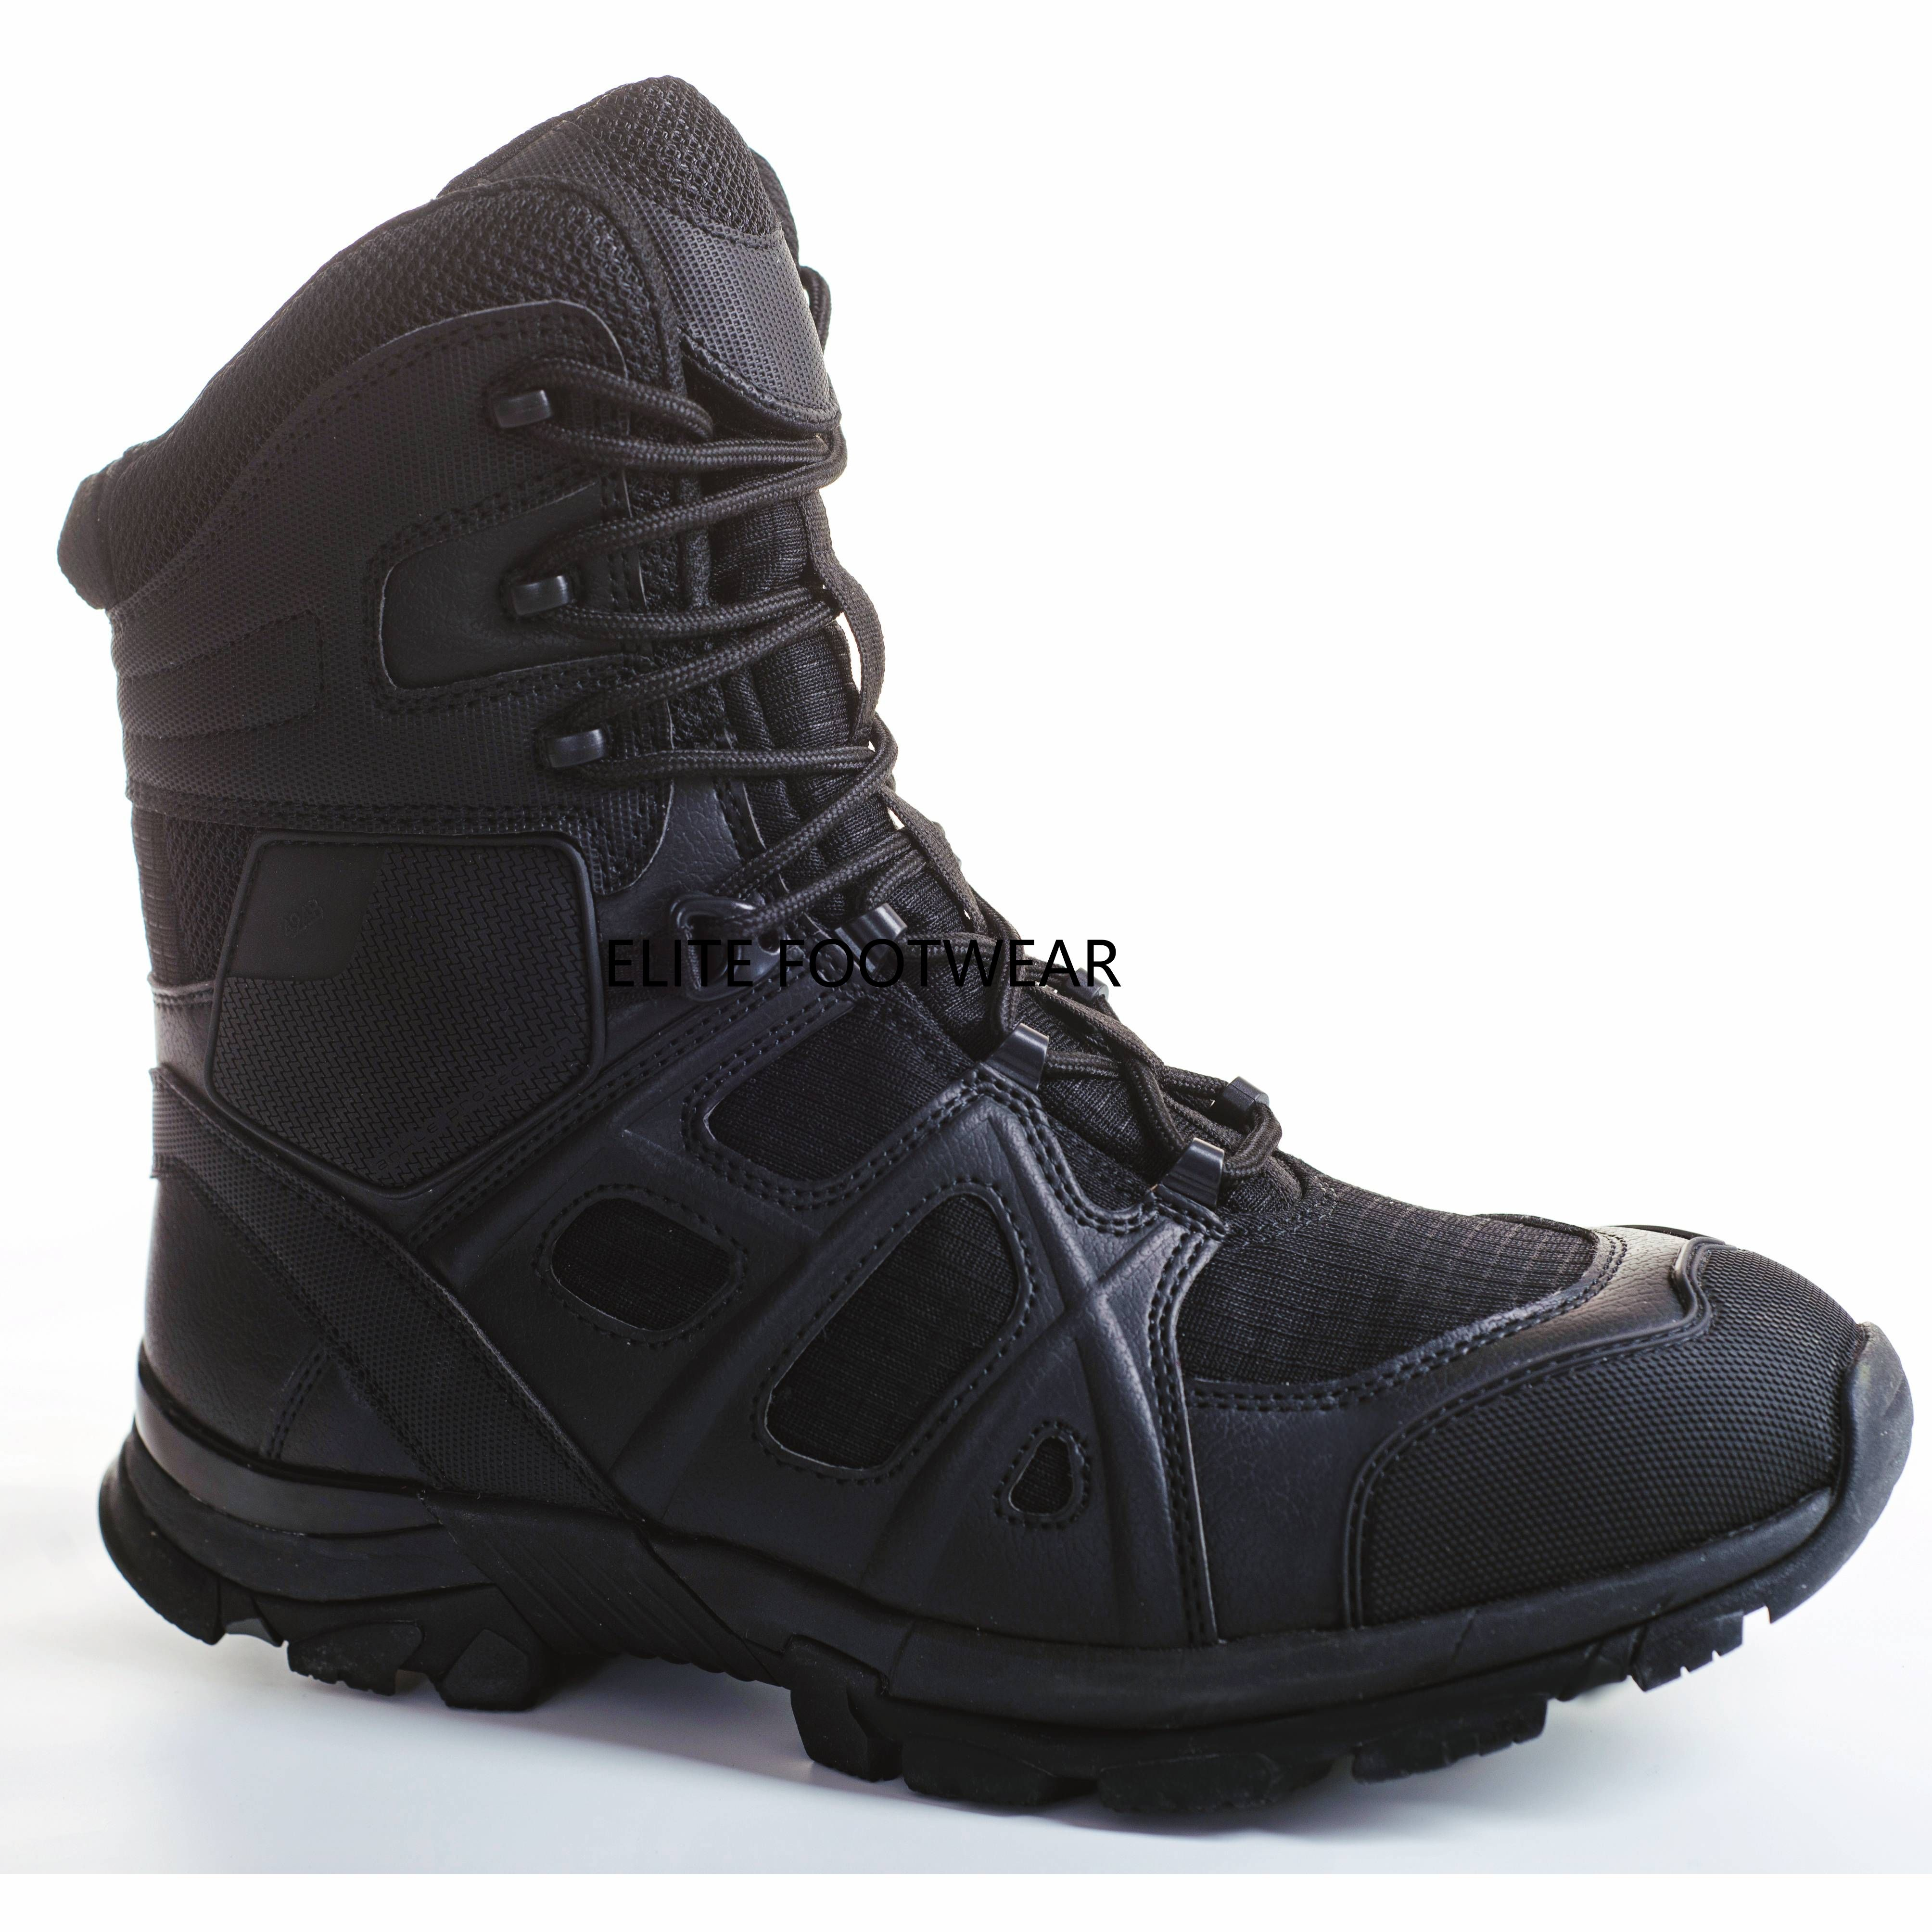 Hot Selling Jungle Boots Breathable Pilot Flying Military Boots black safety shoes botas de seguridad industrial